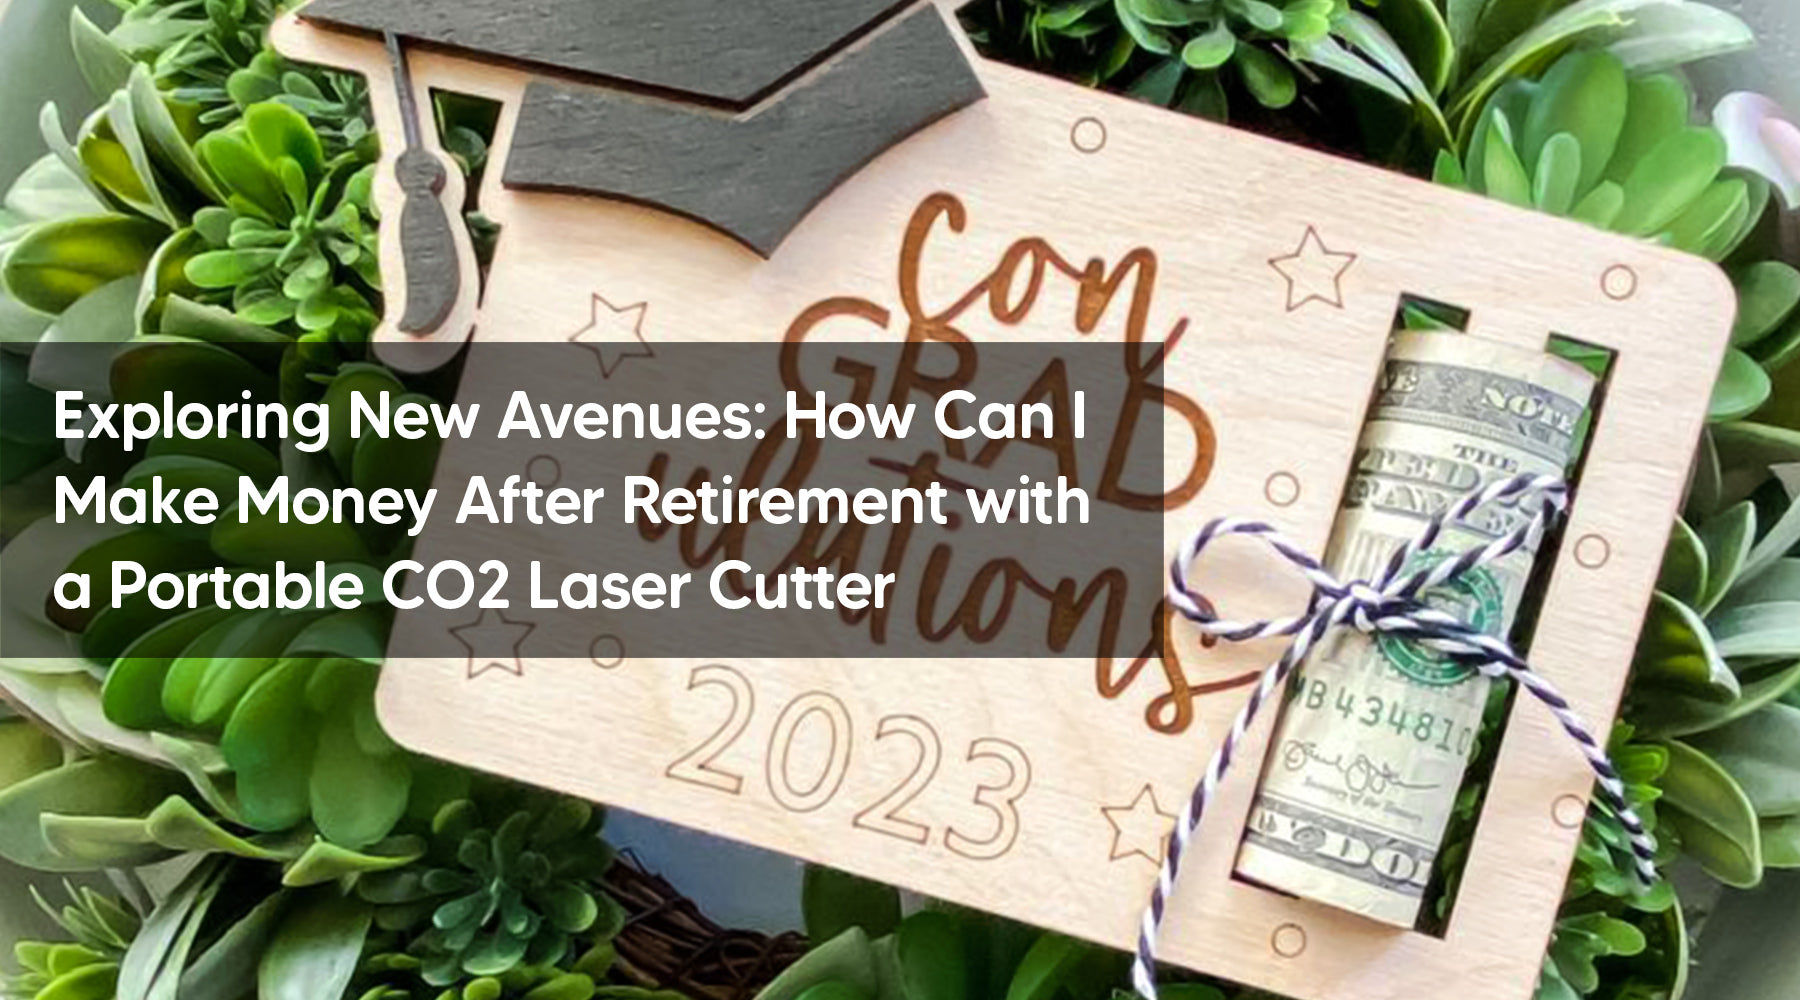 Exploring New Avenues: How Can I Make Money After Retirement with a Portable CO2 Laser Cutter